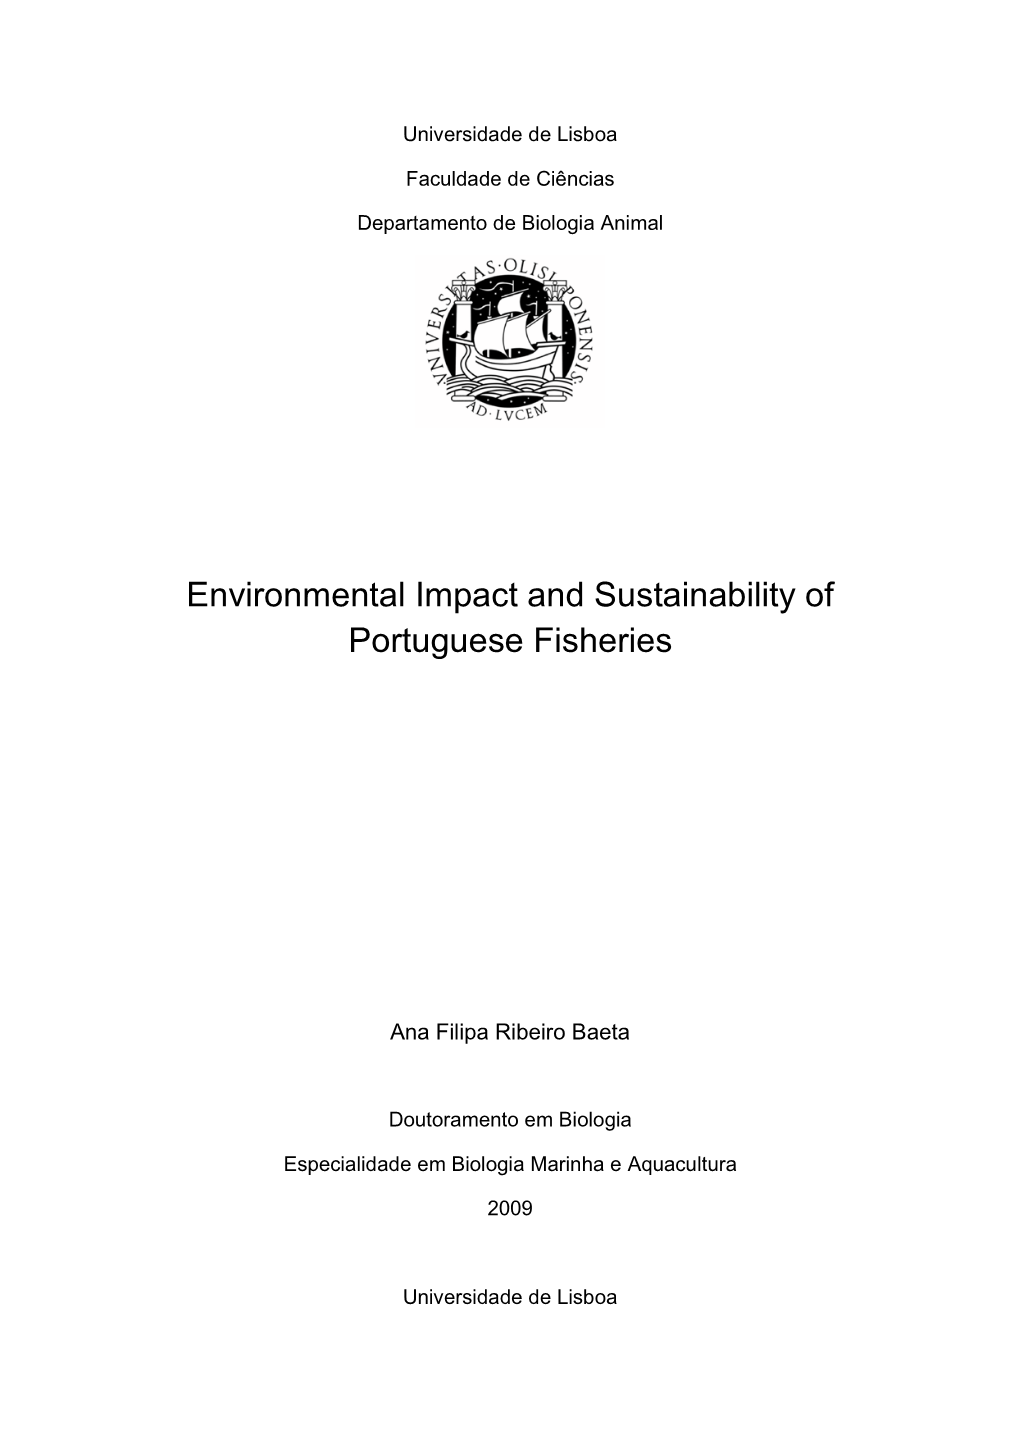 Environmental Impact and Sustainability of Portuguese Fisheries